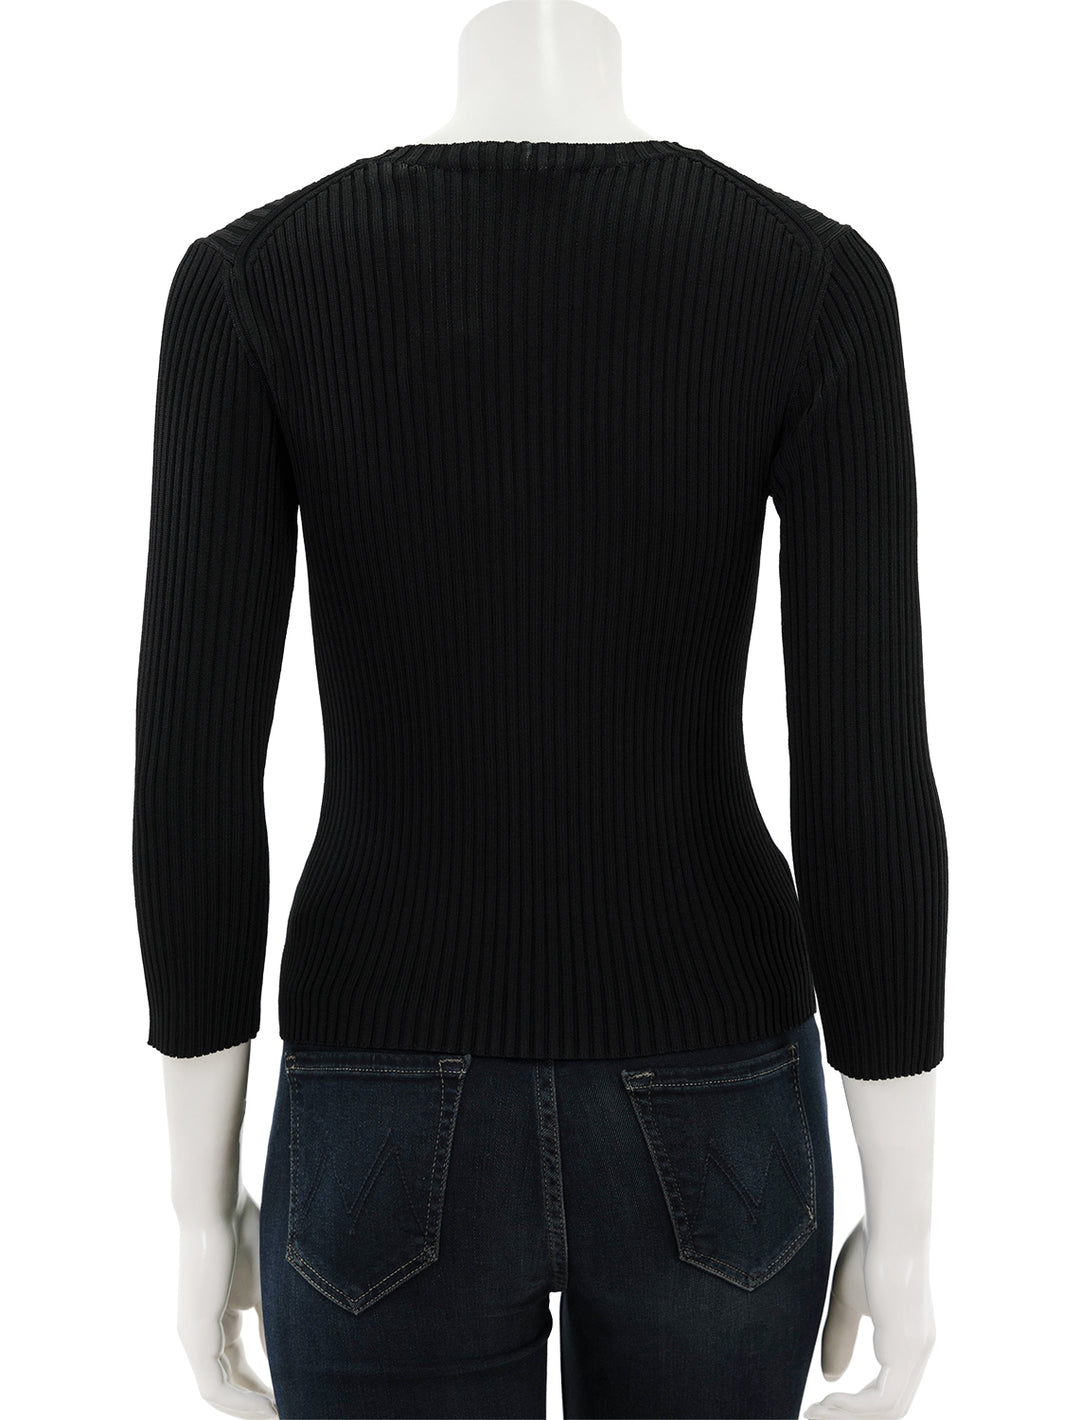 Back view of Vince's ribbed boat neck top in black.